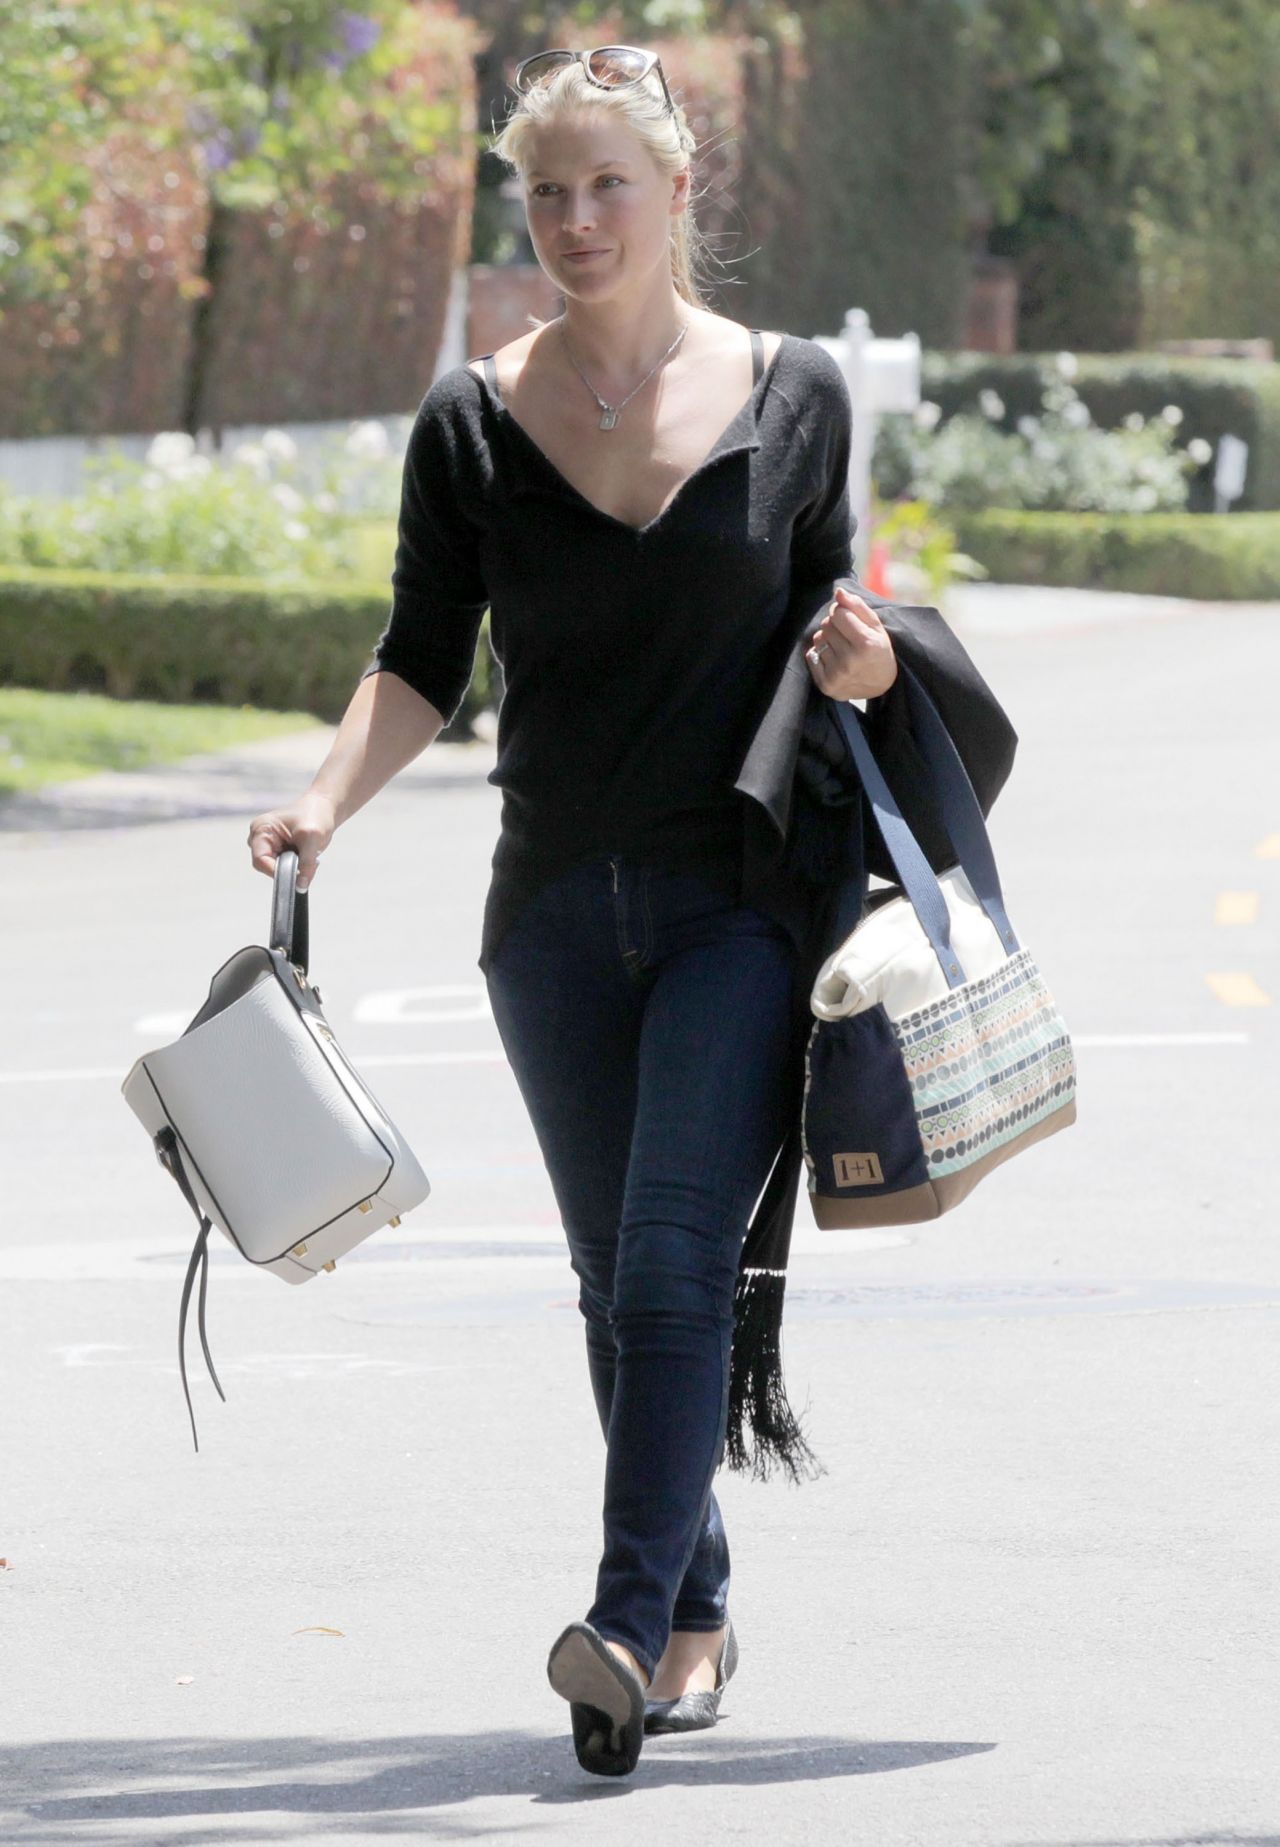 Ali Larter Booty in Jeans - Out in Brentwood, May 2015 • CelebMafia